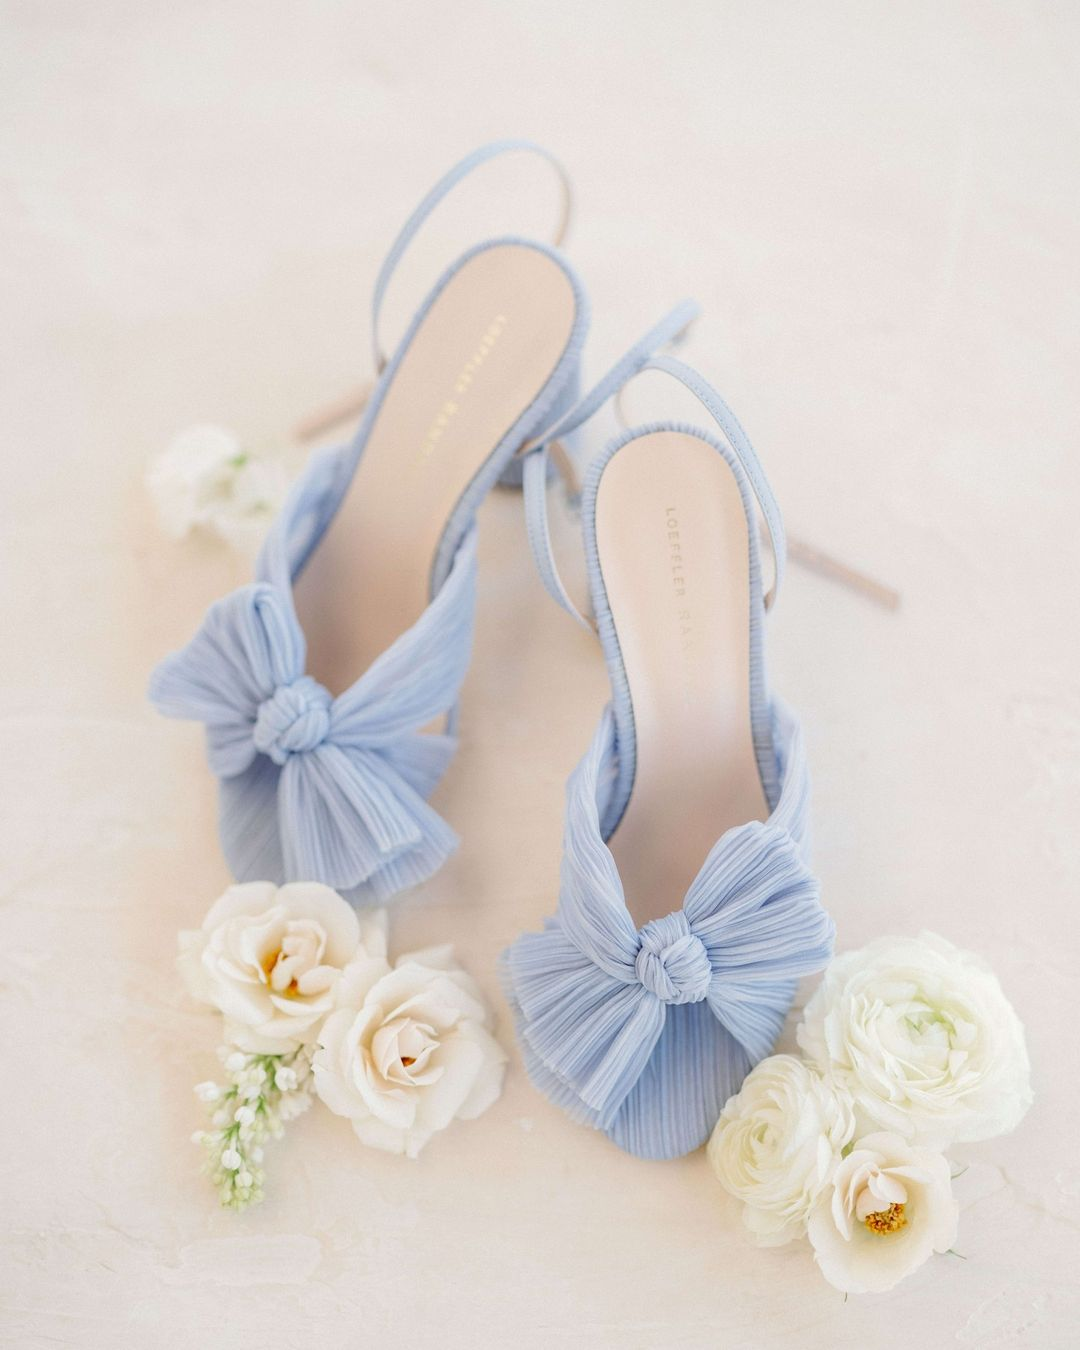 The 20 Best Places to Buy Wedding & Bridal Shoes Online